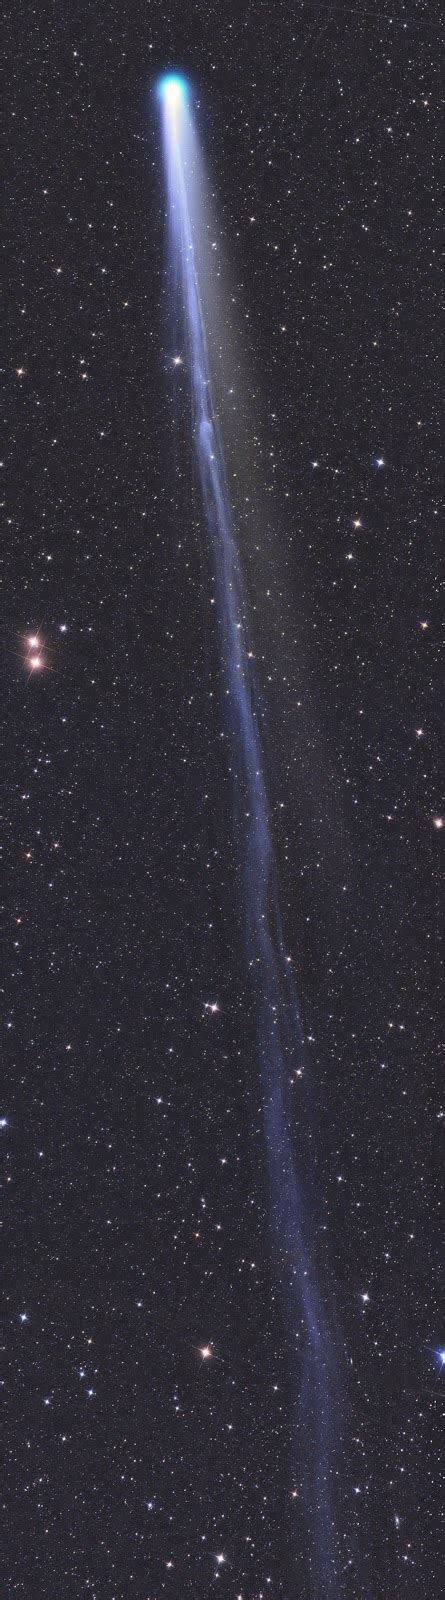 The Urban Astronomer Comet Lovejoy In The Morning